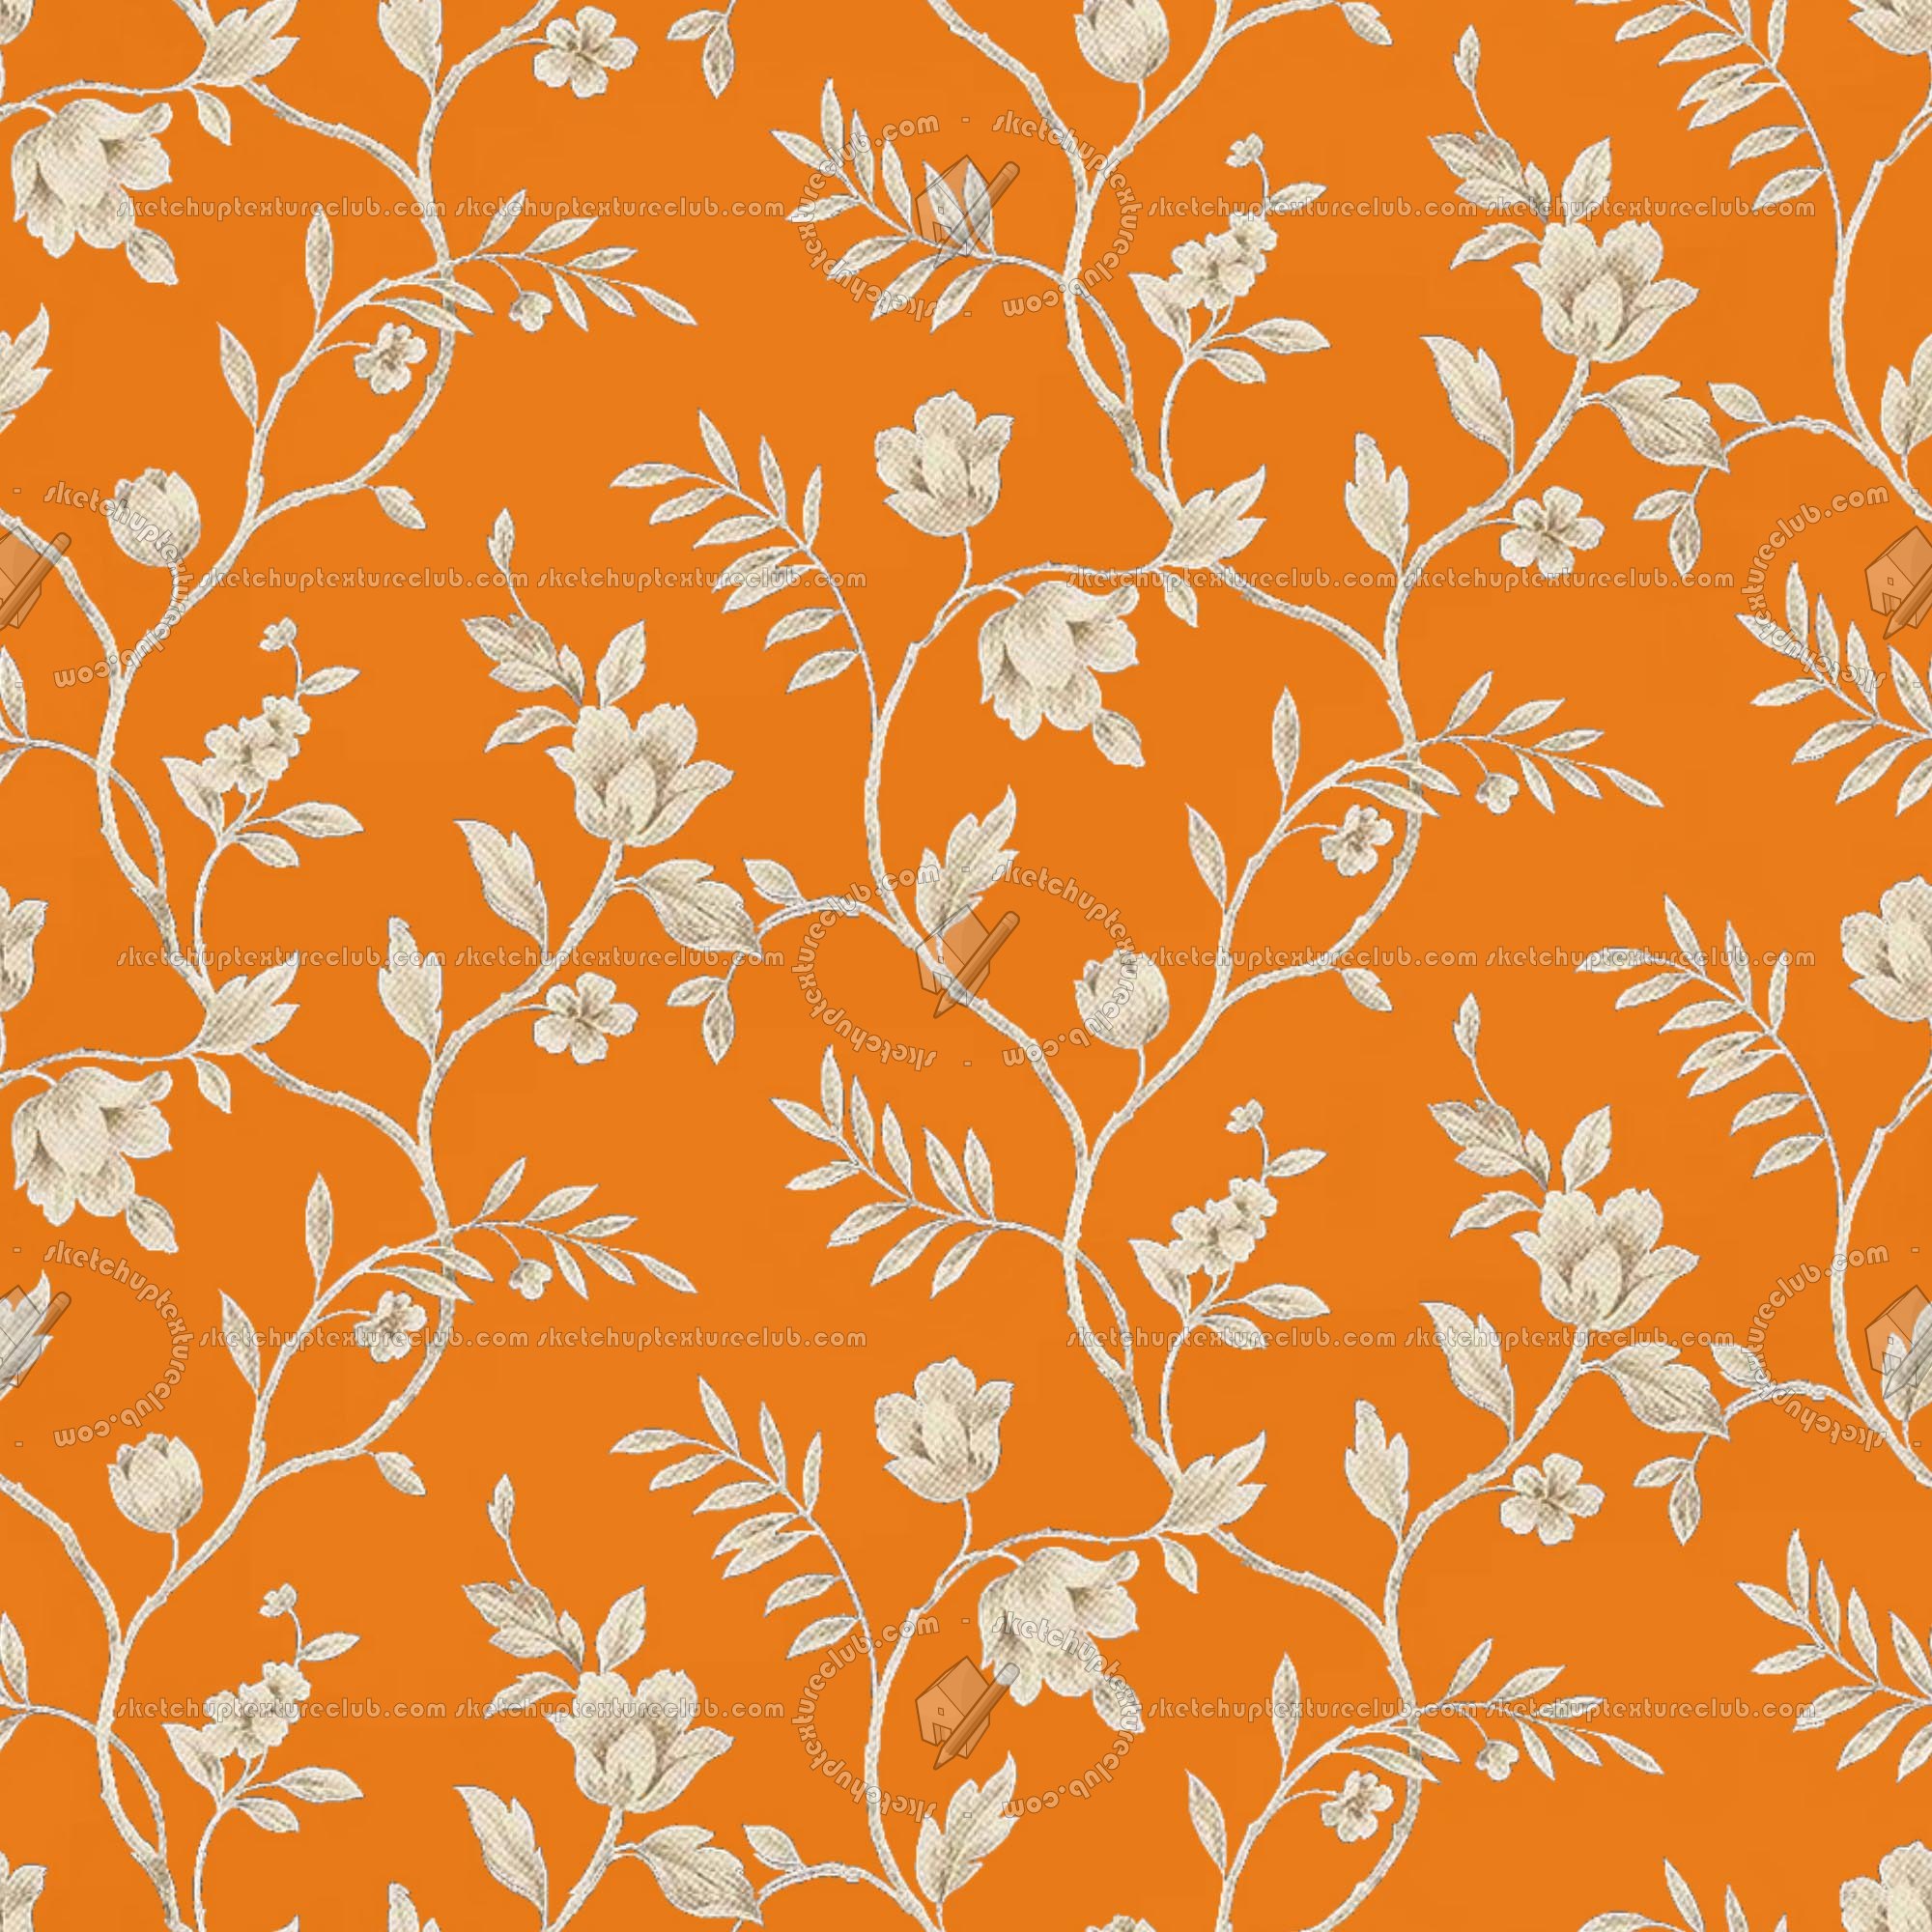 Floreal Wallpaper/fabric Texture Seamless Px - Orange And Grey Seamless , HD Wallpaper & Backgrounds